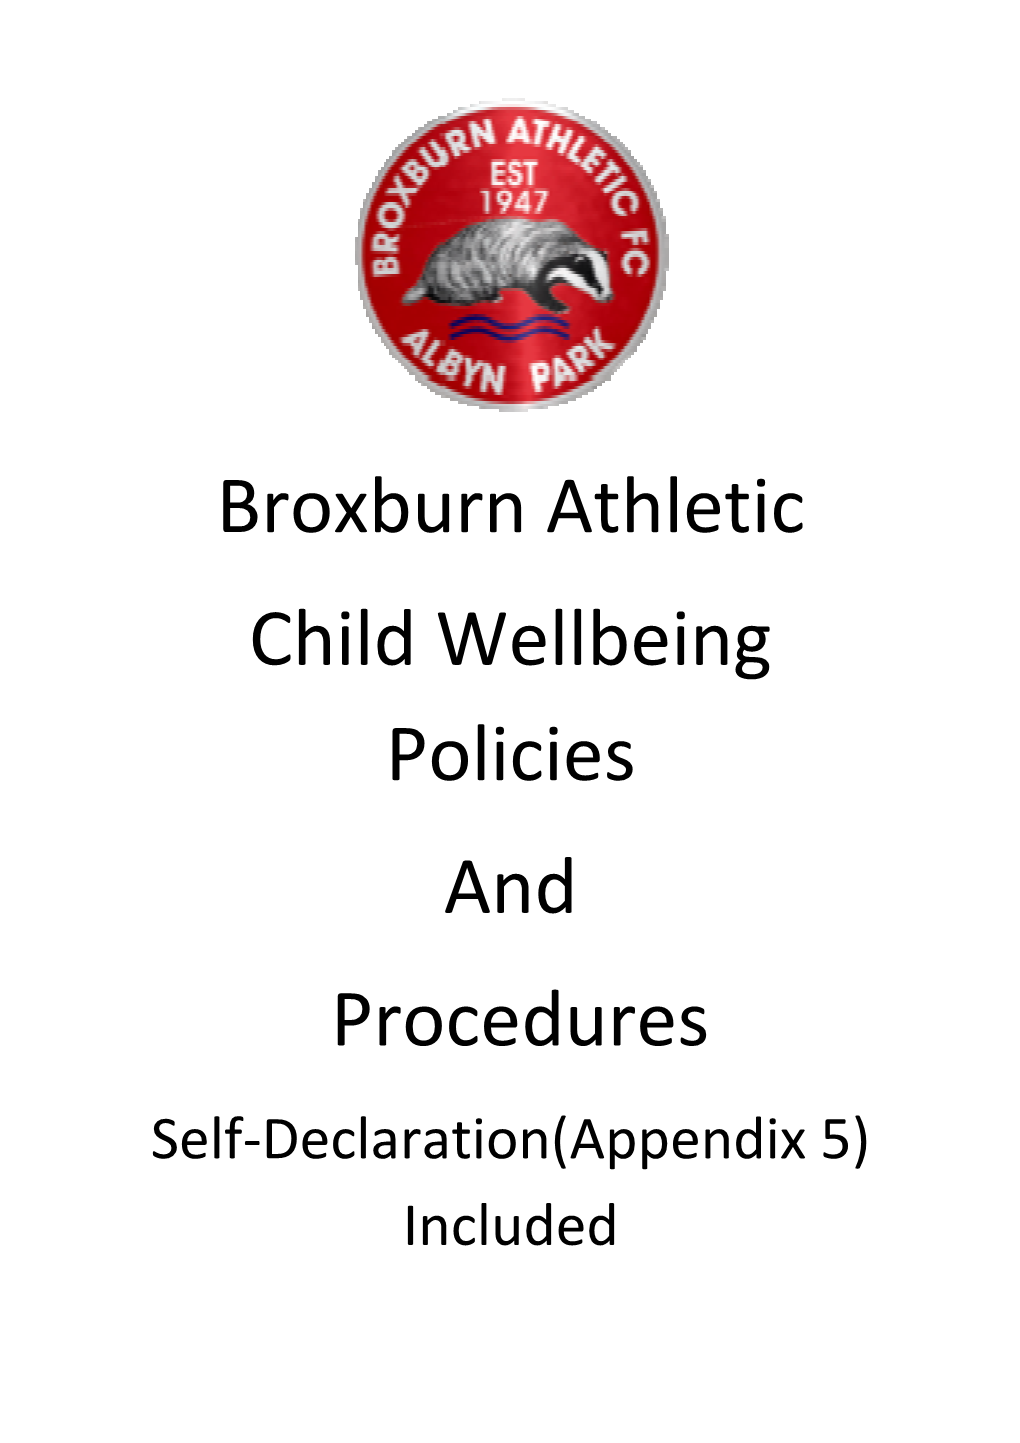 Broxburn Athletic Child Wellbeing Policies and Procedures Self-Declaration(Appendix 5) Included